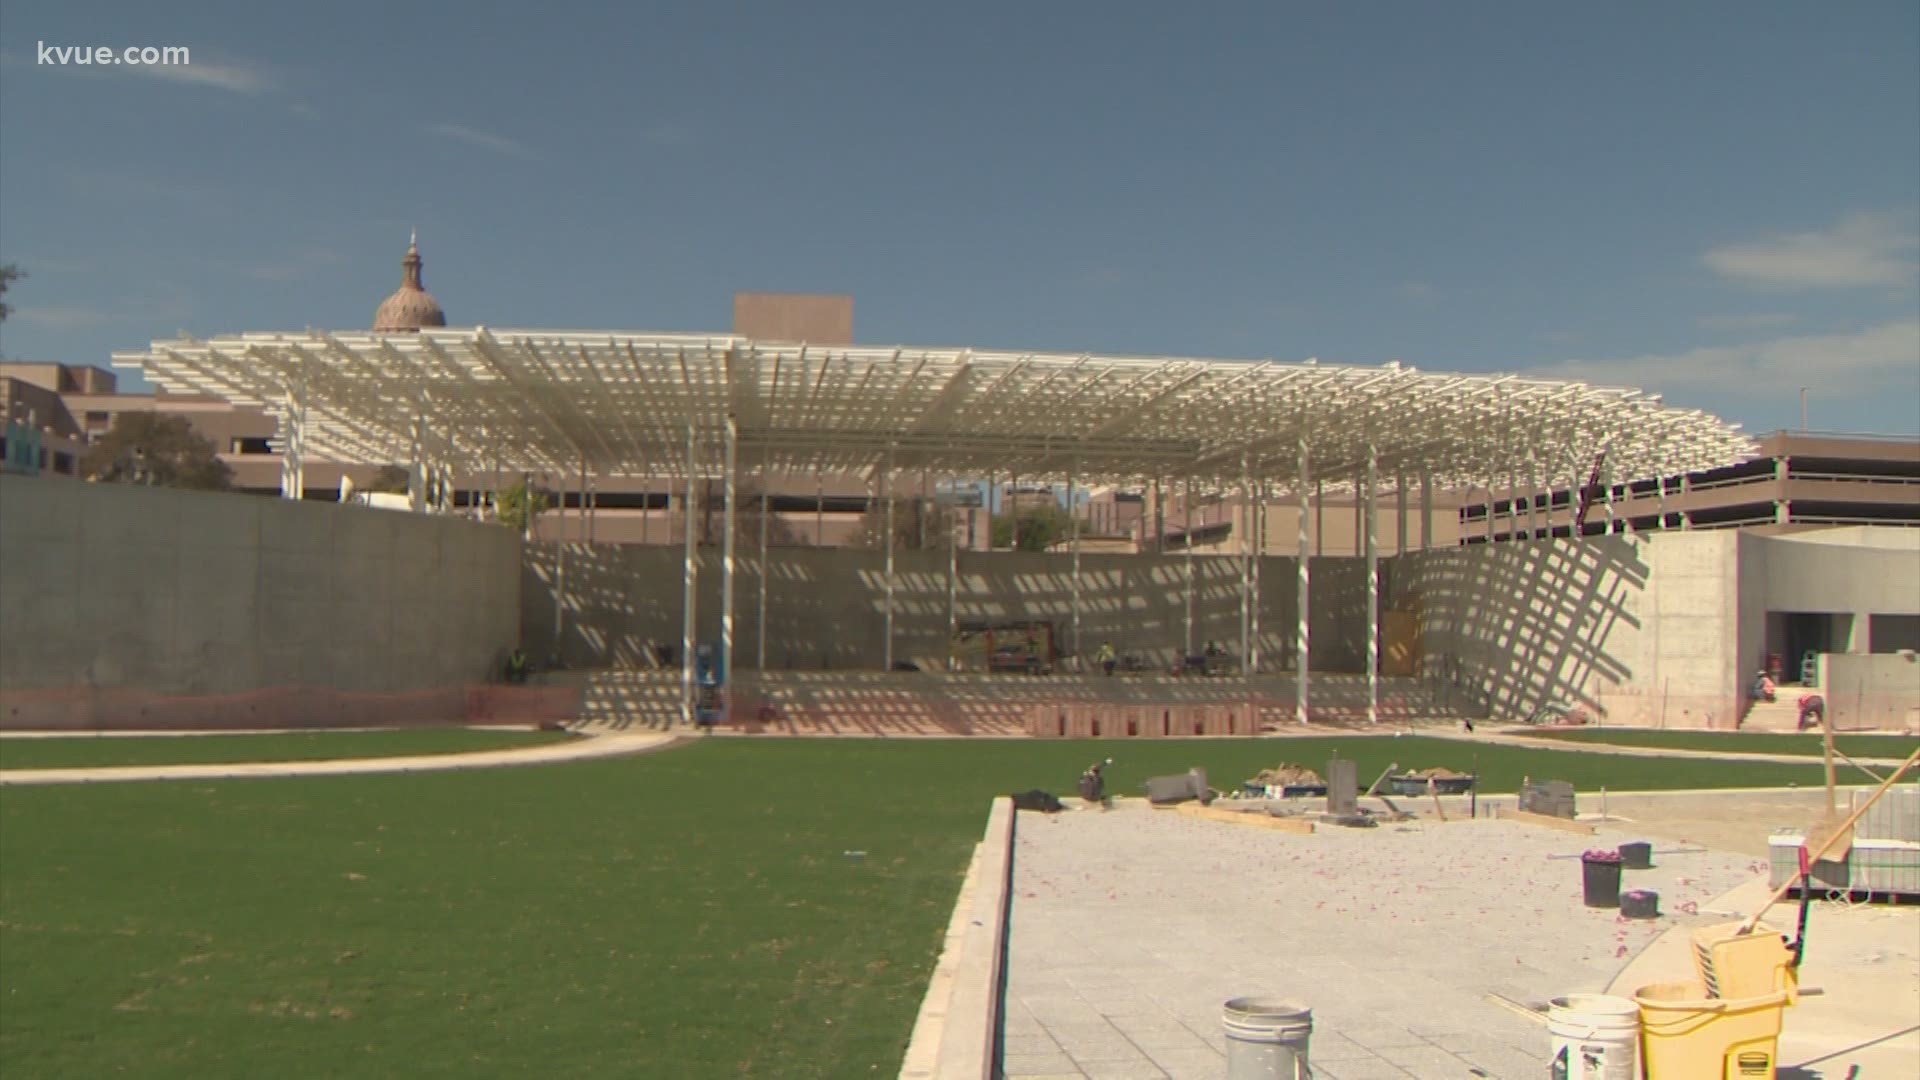 Waterloo Park in Downtown Austin is nearing public opening. It will be home to a 5,000 capacity outdoor amphitheater.